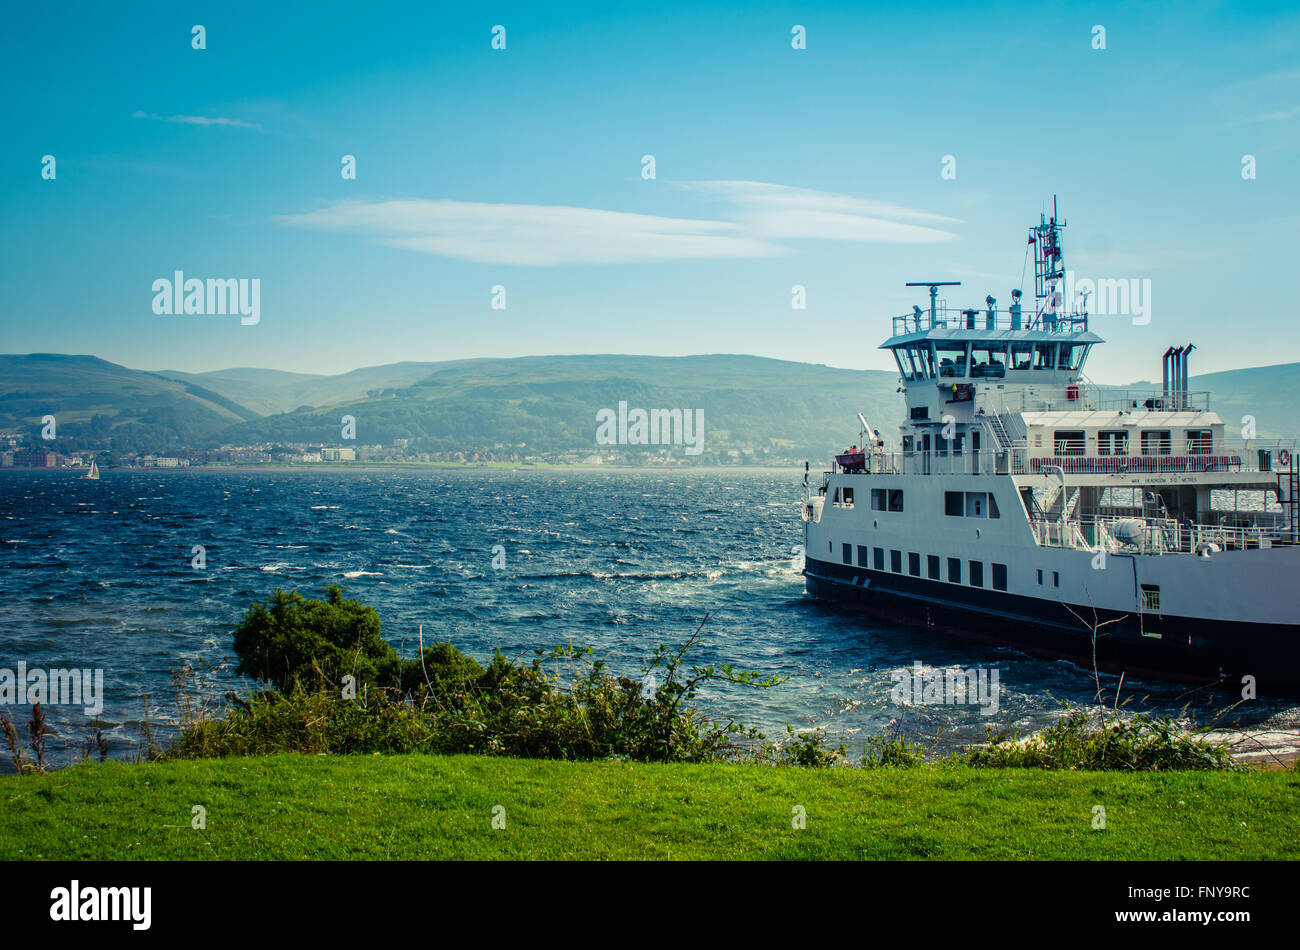 A Car Ferry Leaving Port  From A Scottish Island Stock Photo